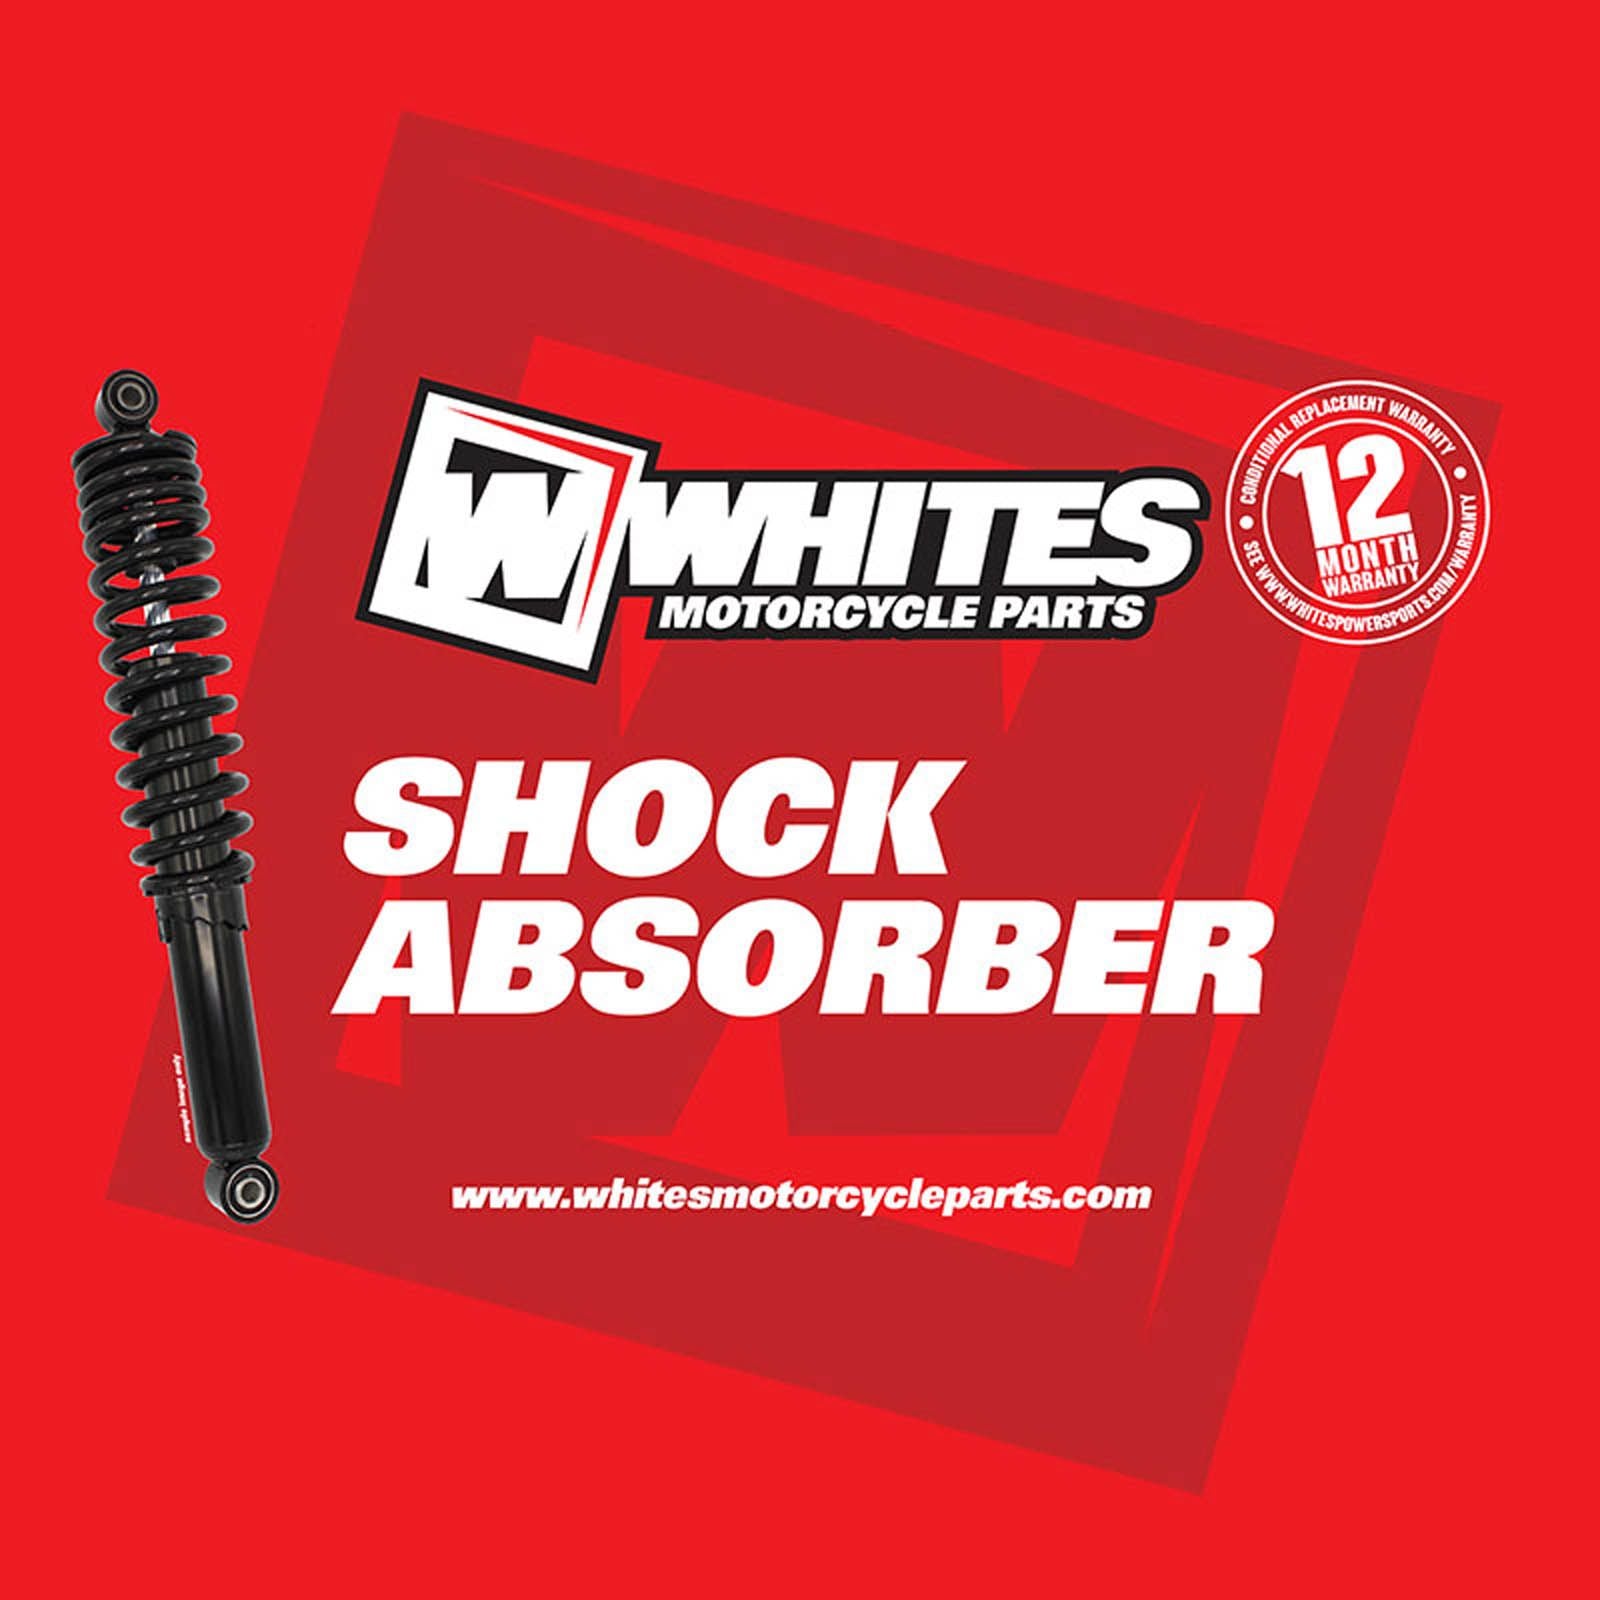 New WHITES Shock Absorbers - Front For Yamaha Grizzly 550/700 #WPSA008